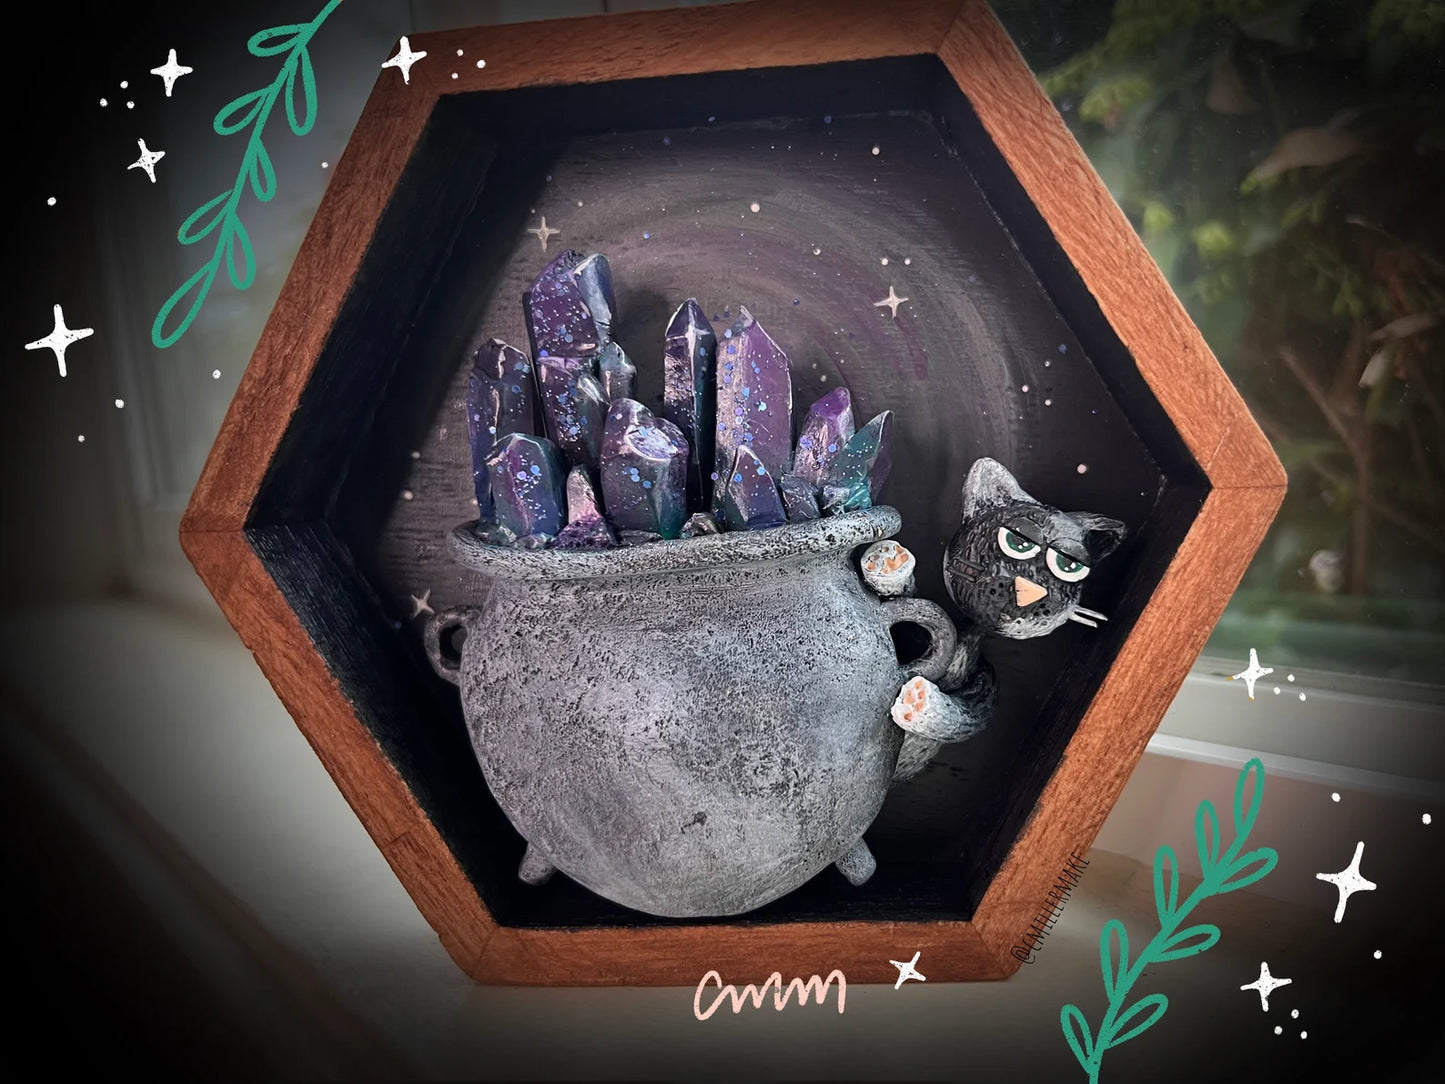 Cat & Crystal Cauldron Shadow Box | Fluorite Crystal and Cat Mini Sculpture | Witchy Wall Hanging or Desk Decor | Spooky Shadowbox